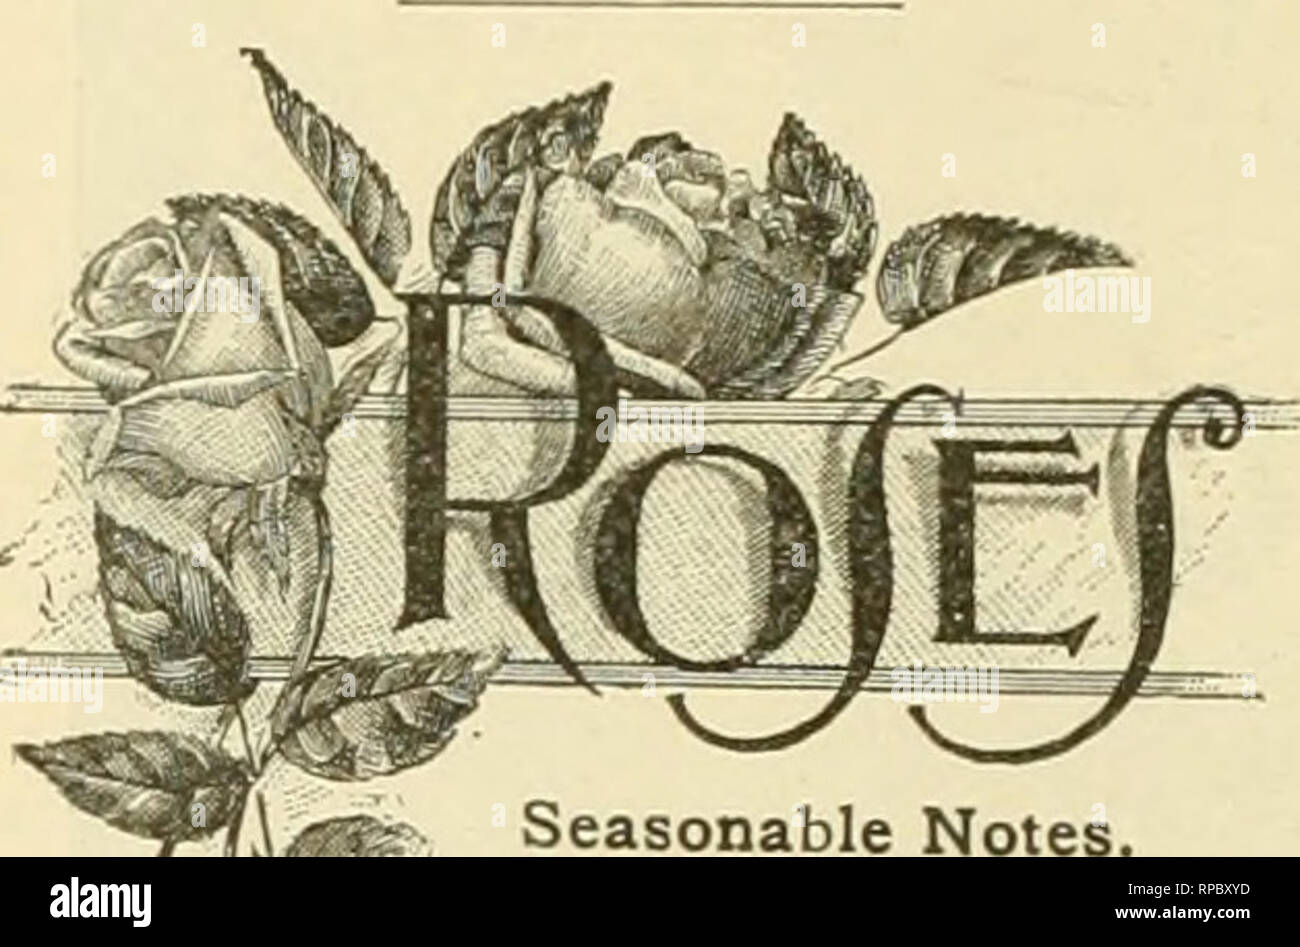 . The American florist : a weekly journal for the trade. Floriculture; Florists. 88 The American Florist, Oct. I. tionale of the ordinary type, while M. Alfred Mame and BIrs. E. G. Hill will, we think, never be surpassed in their particular line. Already quite an ex- tended list of &quot;Bruants&quot; are found cala- logued, and below the color of a few of the most noticeable is indicated : Dr. Thouvenot, semi-double—soft rosy scarlet. J. Chretien—rosy carmine shading to soft scarlet. Le Cid—A shade nearer scarlet than J. Chretien, floret circular. Georges Ohnet—Brilliant scarlet. Barbizet—Two Stock Photo